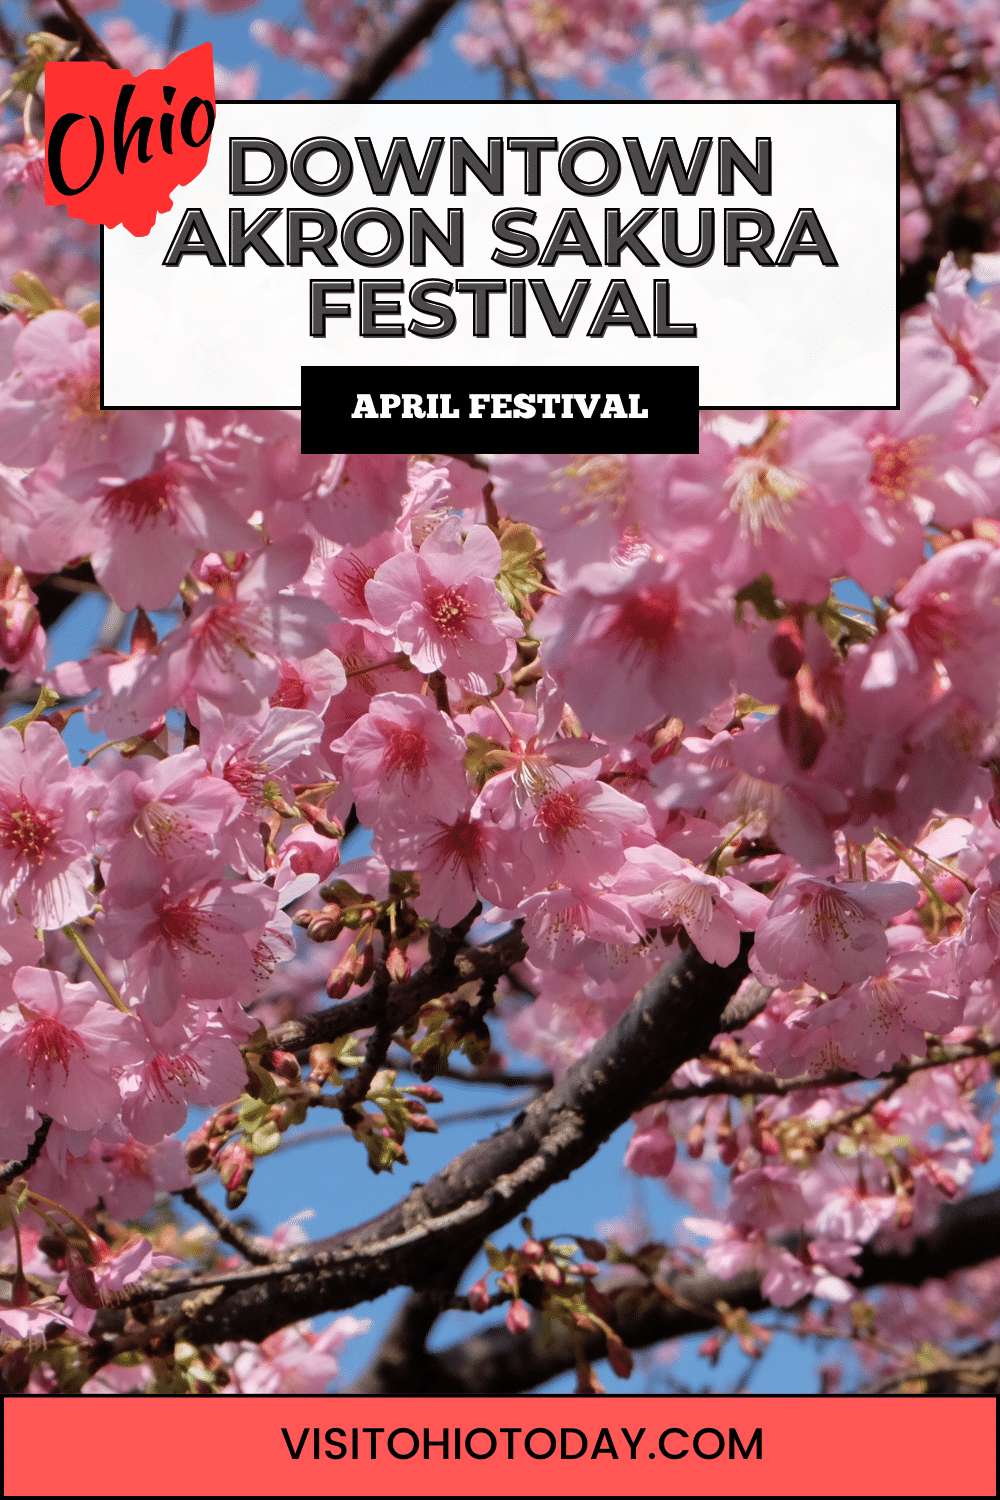 The Downtown Akron Sakura Festival will celebrate spring and cherry blossom trees in early April.